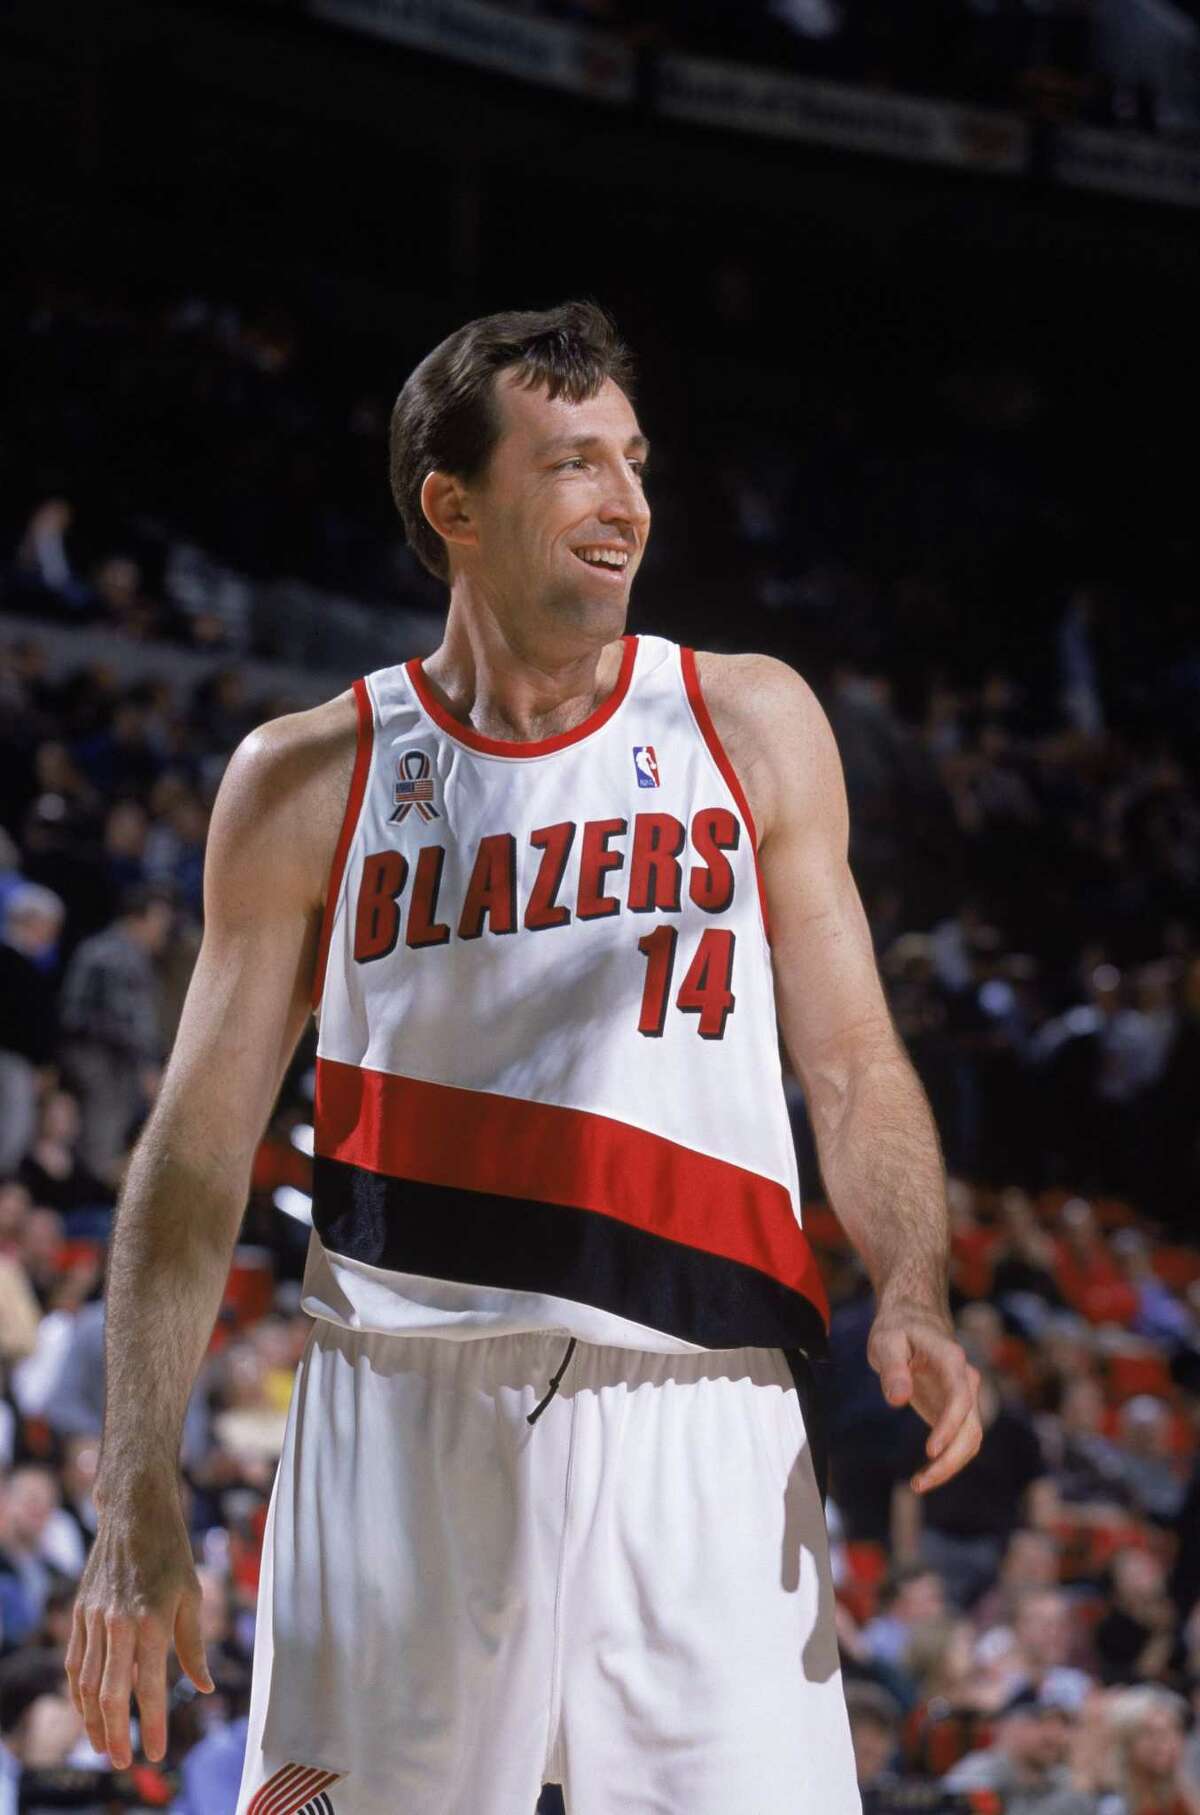 Stamford native and 16-year NBA veteran Chris Dudley thrilled to see